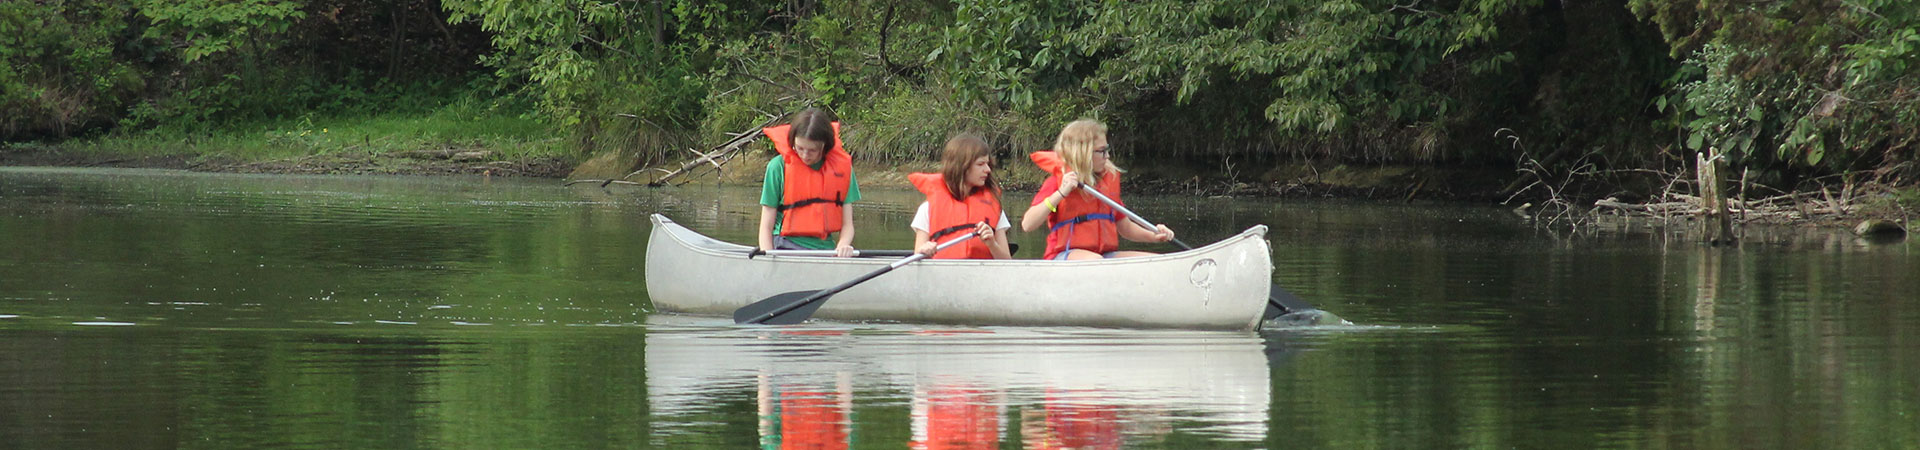  girl scouts at camp 